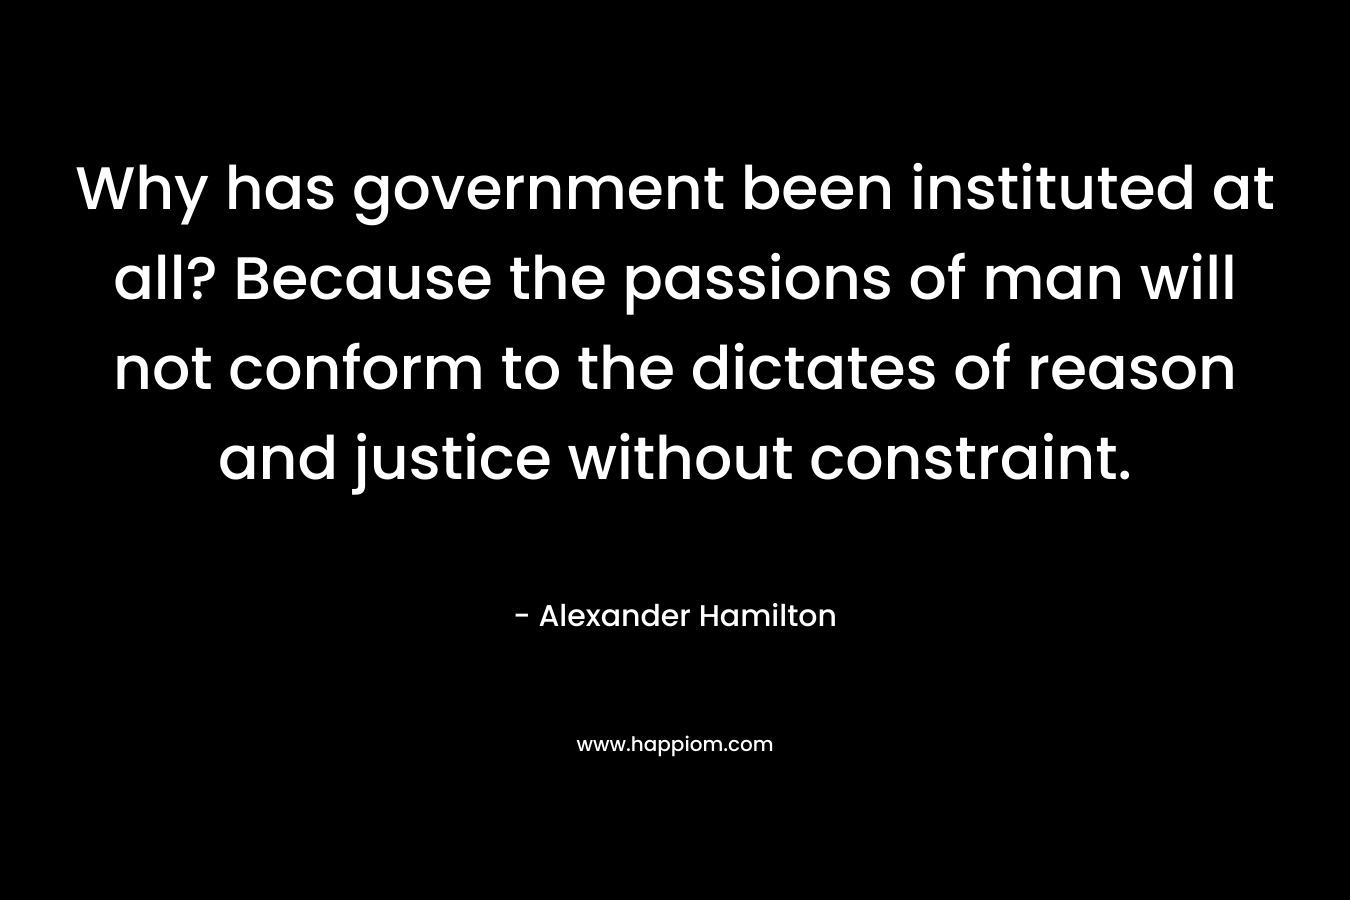 Why has government been instituted at all? Because the passions of man will not conform to the dictates of reason and justice without constraint. – Alexander Hamilton